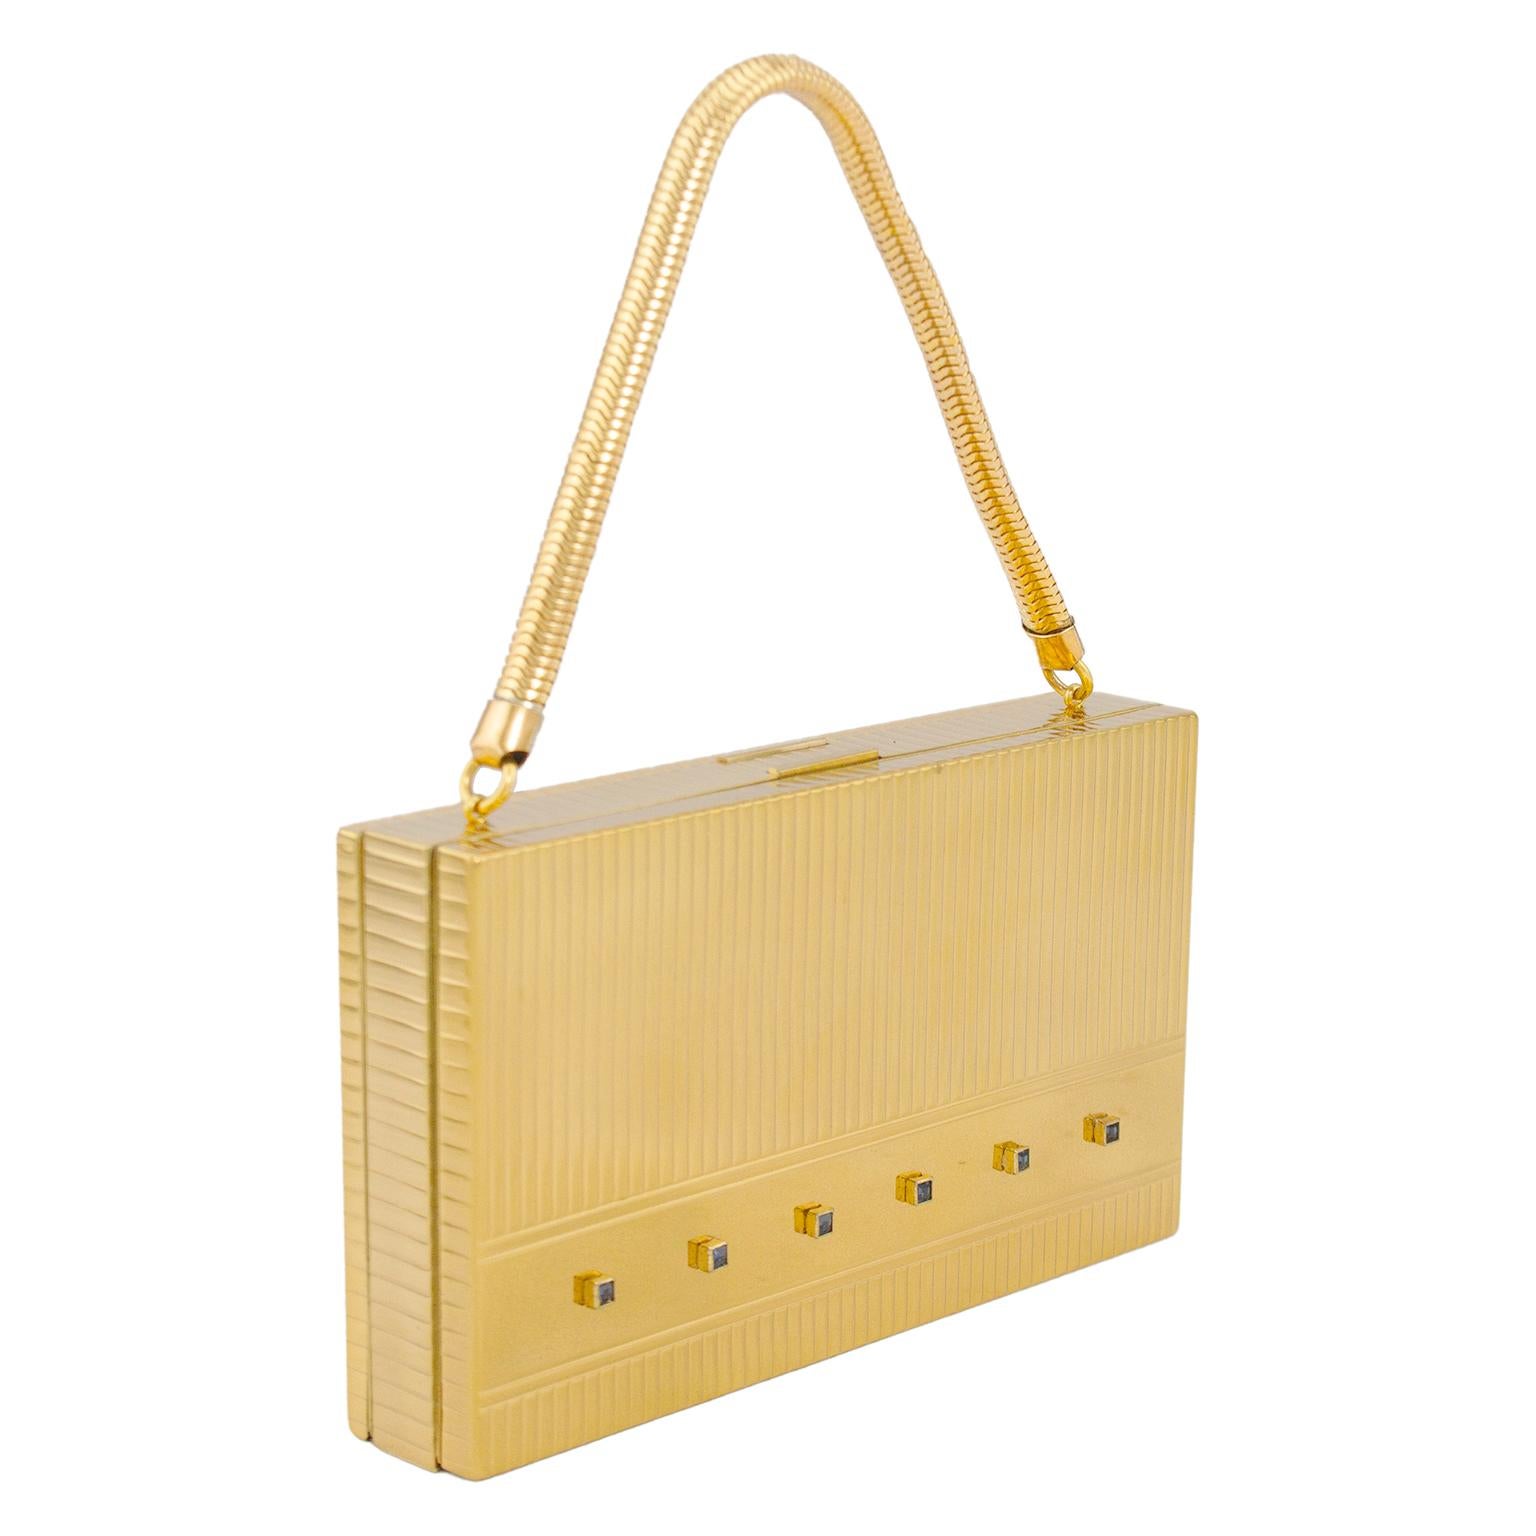 Before mobile phones, the favorite evening bag of the 1950's socialite was a hard case Evans Case Co. minaudiere with efficient compartments for the must haves of the night; lipstick, powder, comb, cigs, a mirror and some coins for the attendant in